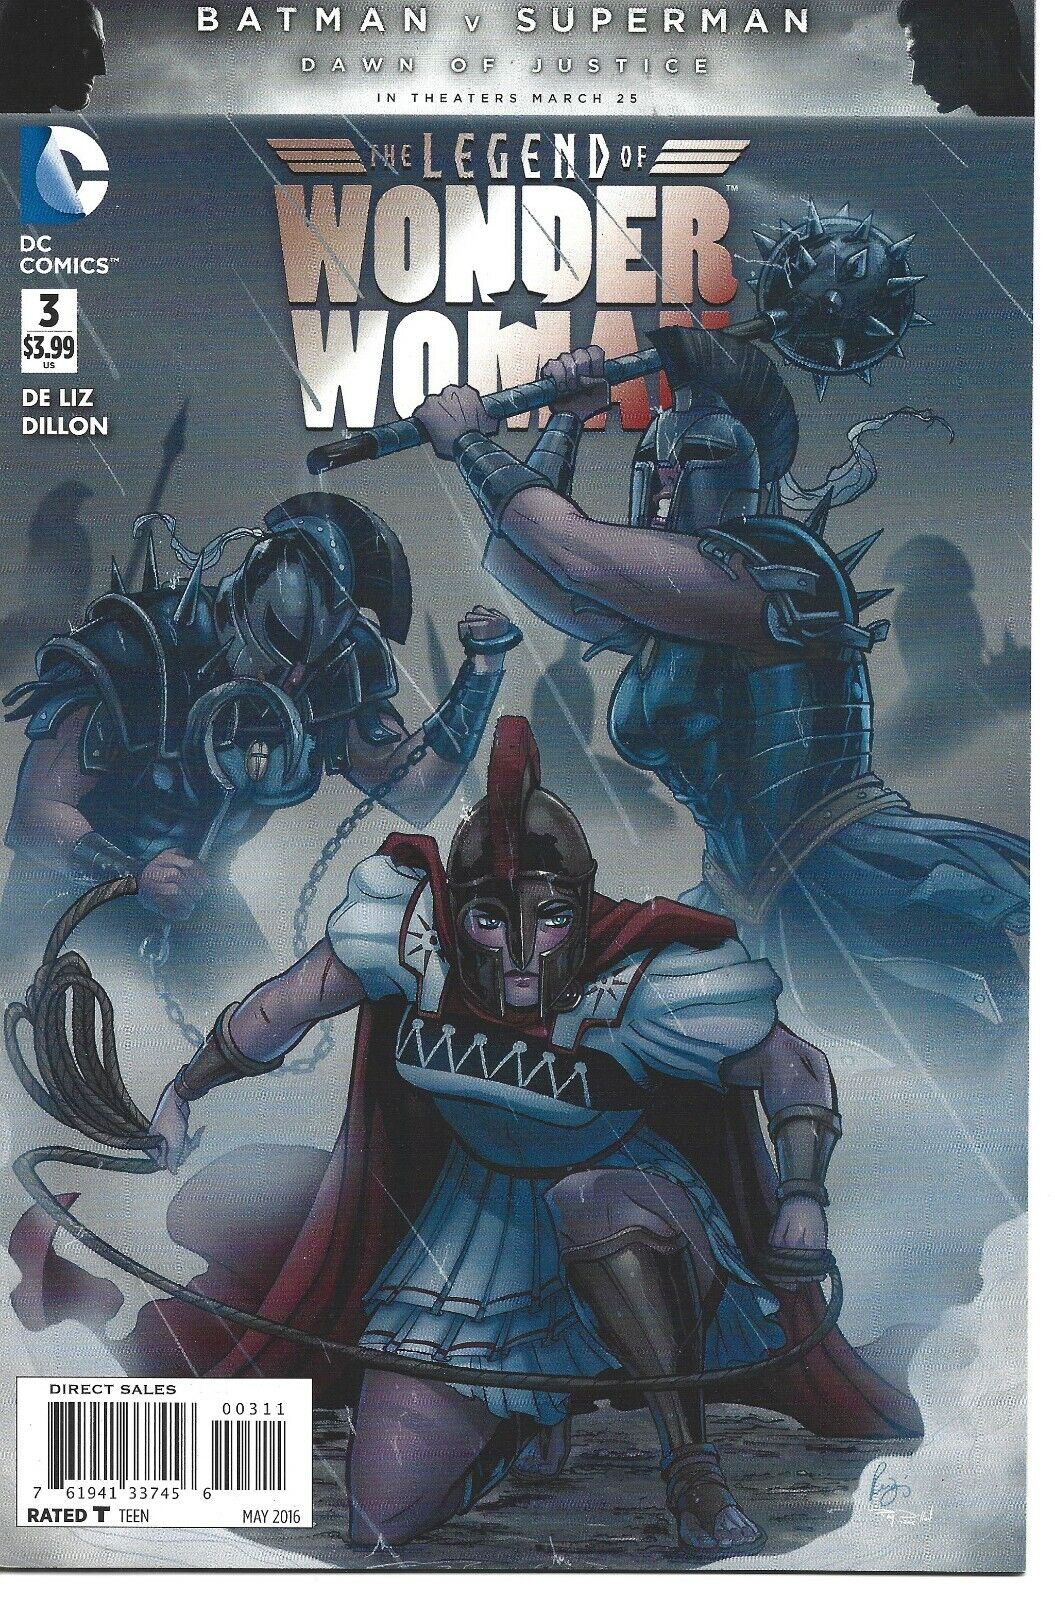 THE LEGEND OF WONDER WOMAN #3 DC COMICS 2016 BAGGED AND BOARDED